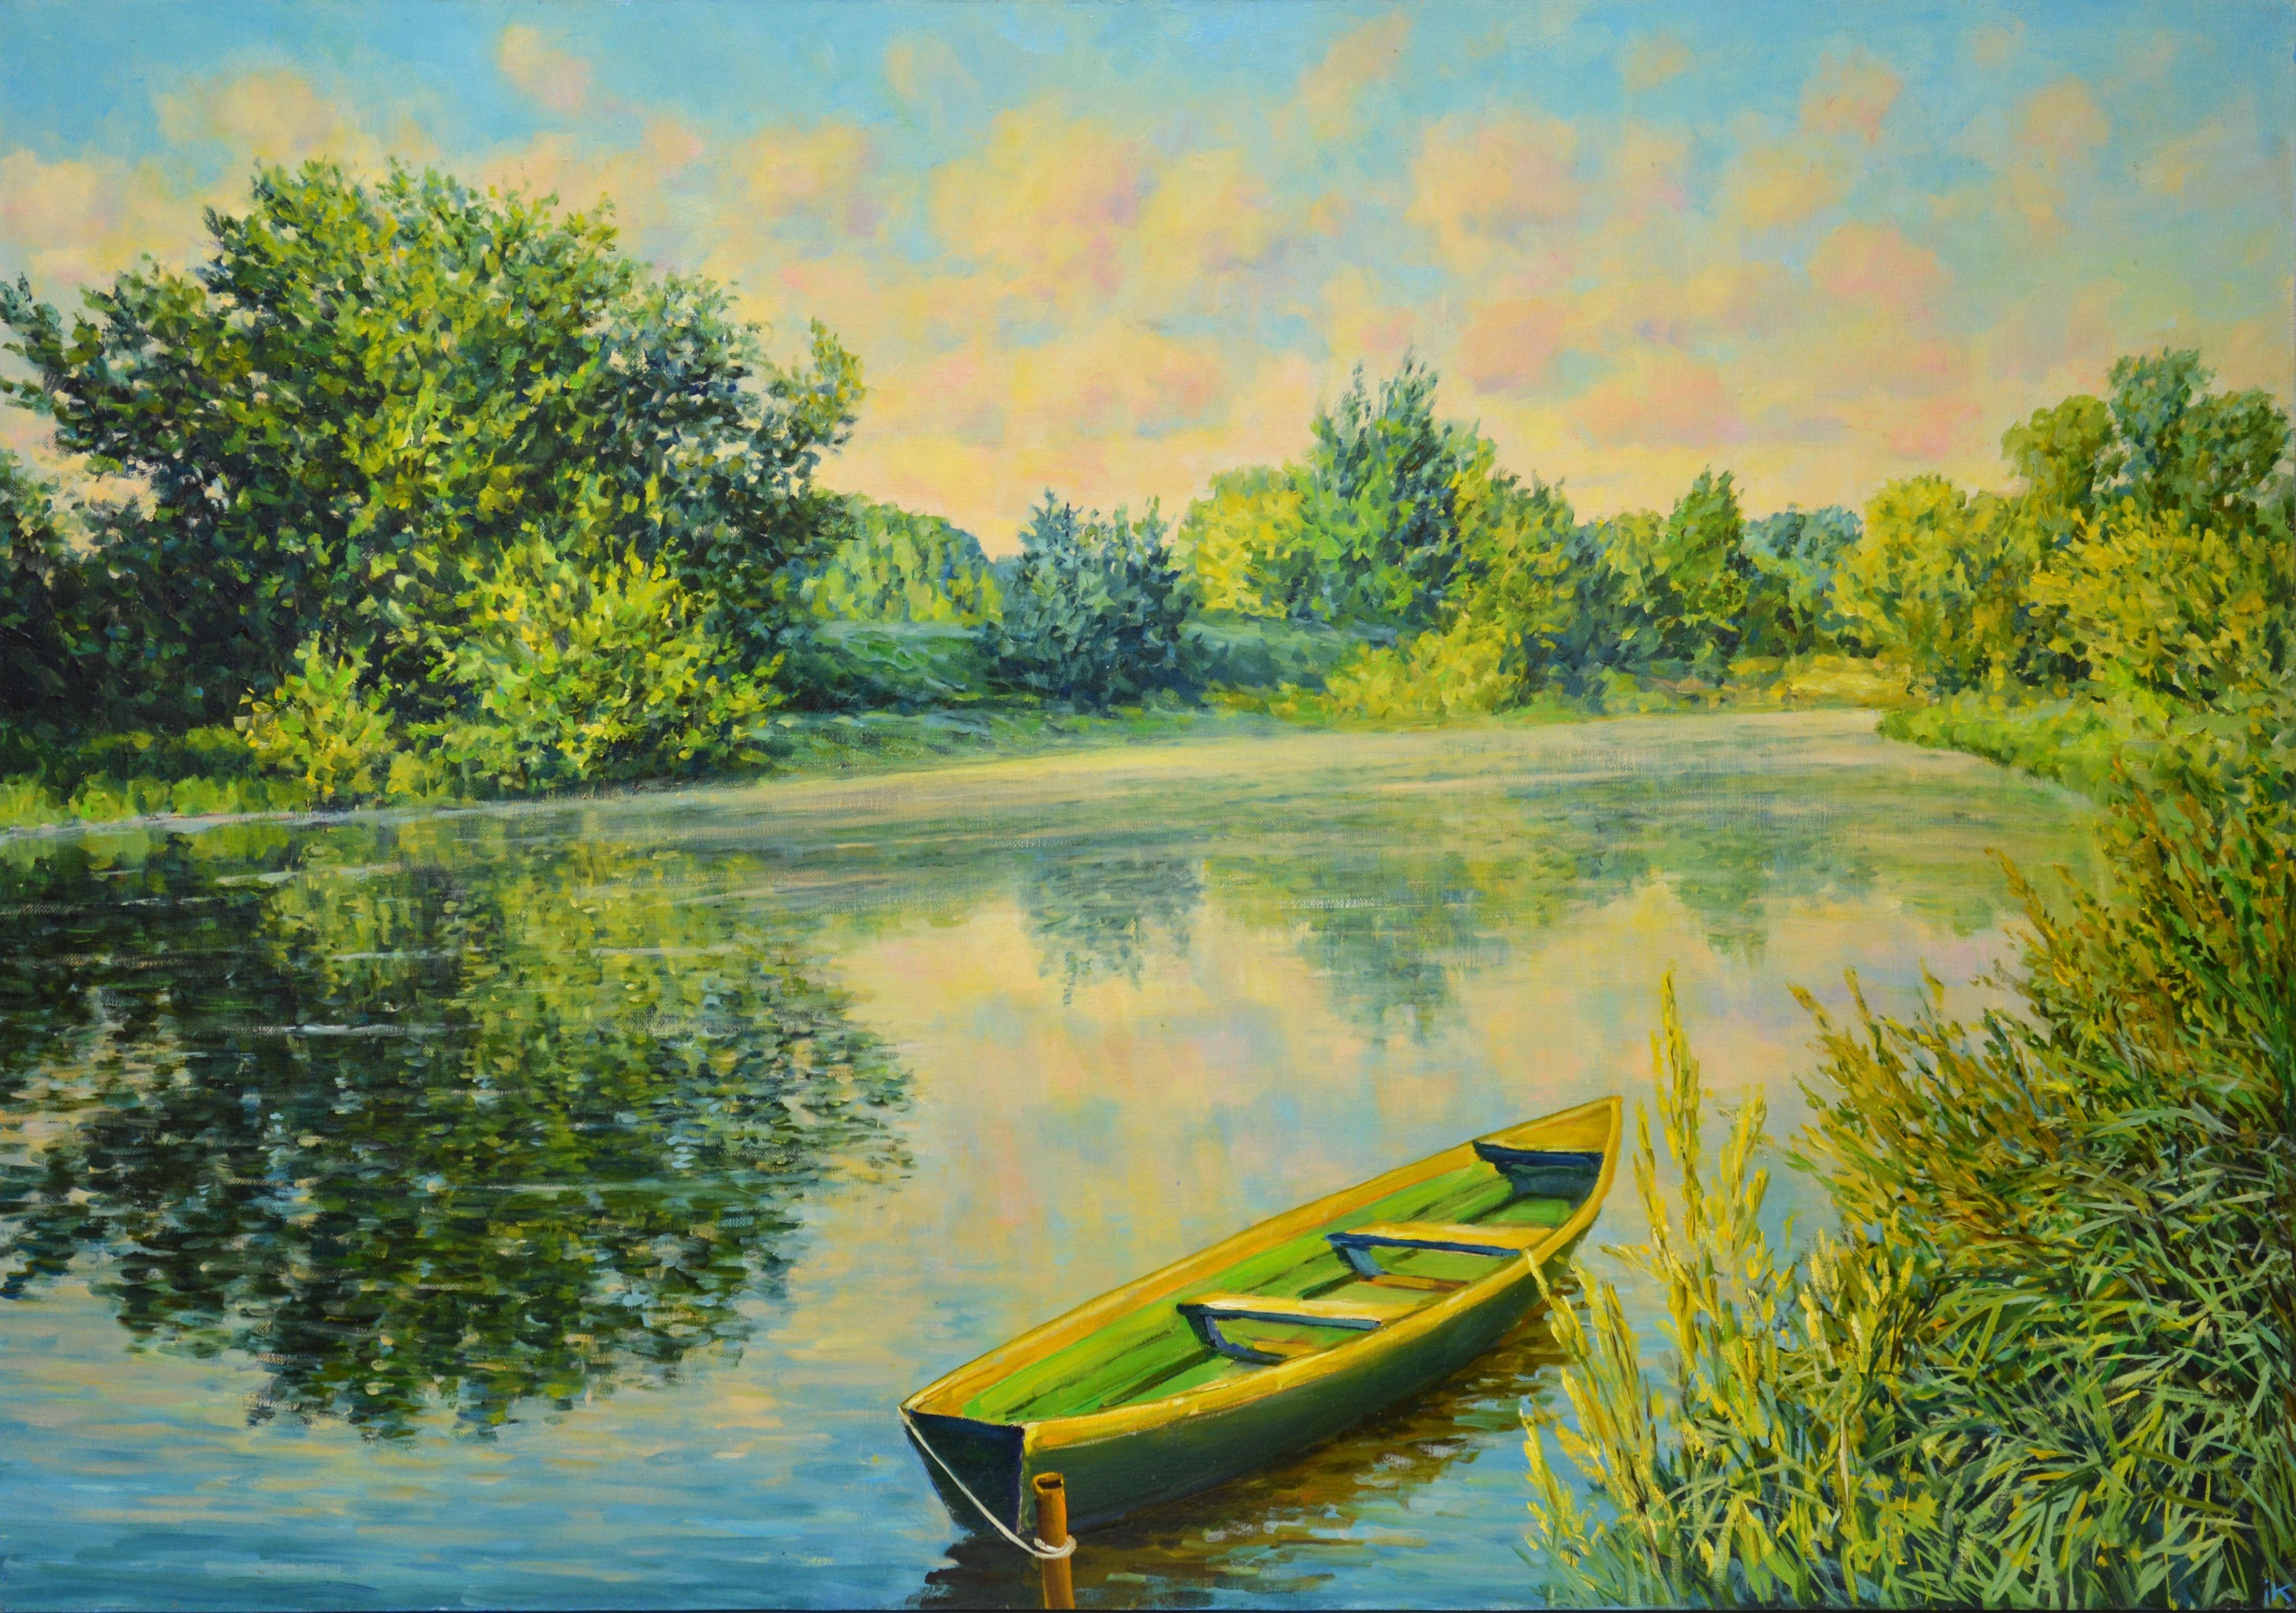 Painting. Morning on the river. Impressionism. A saturated palette of greenery, water, a boat on the shore, the reflection of the sky in the water cause a feeling of love and gratitude to nature. The picture has a good spatial quality, and the